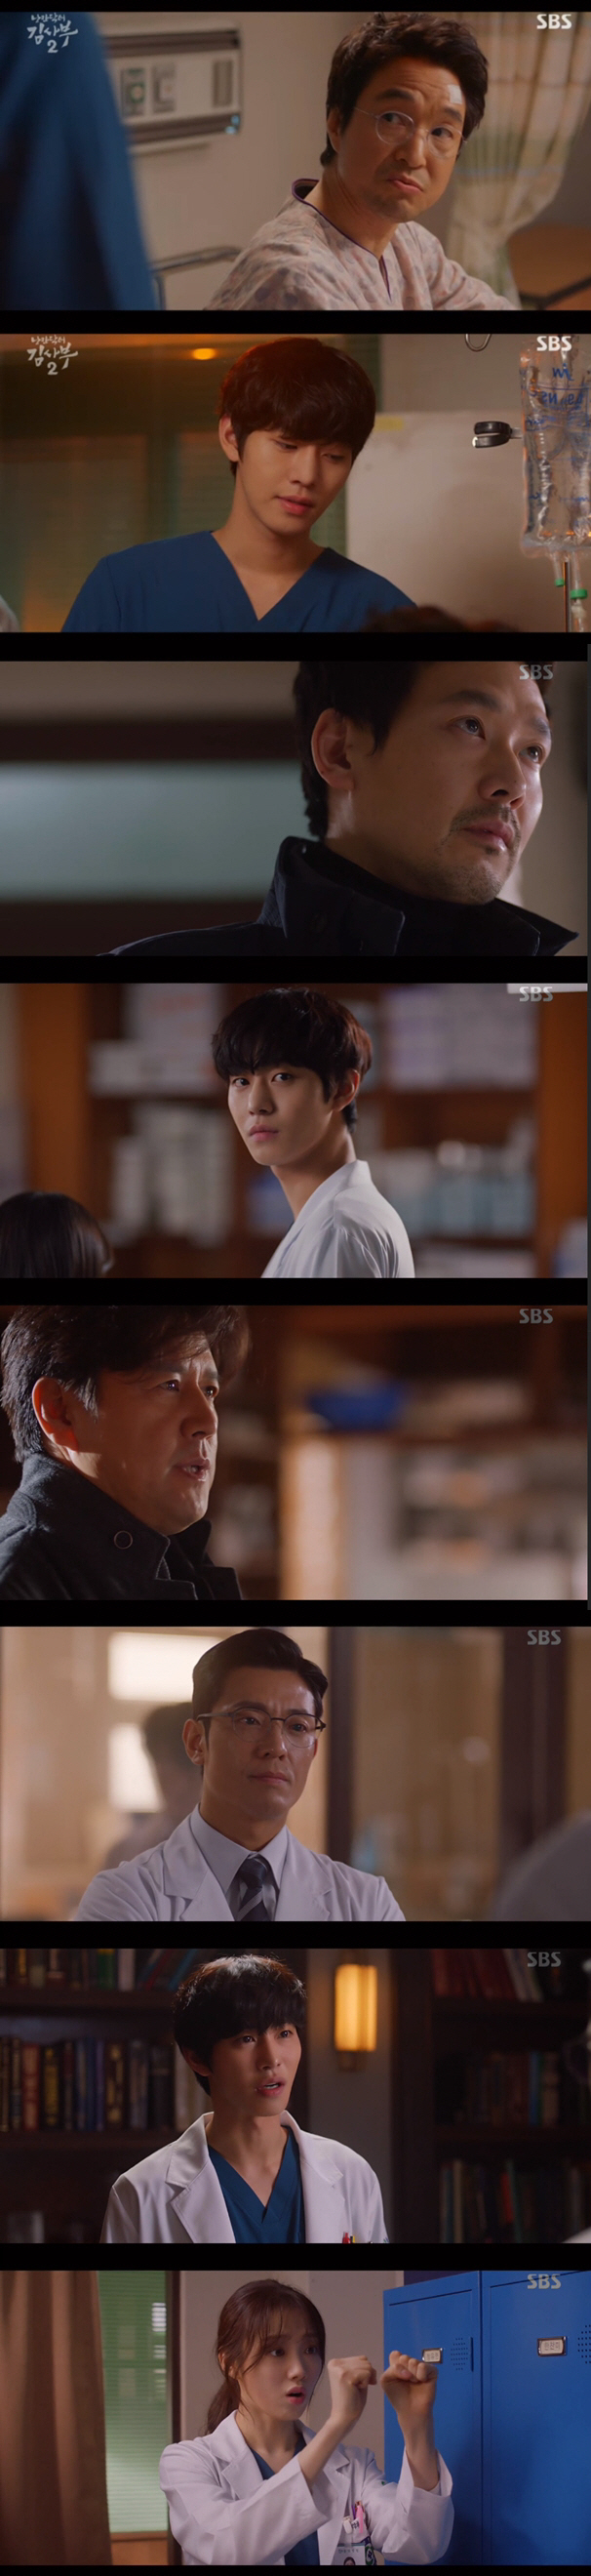 Romantic Doctor Kim Sabu 2 Ahn Hyo-seop was troubled to know Lee Sung-kyungs surgery real number.On the 10th SBS drama Romantic Doctor Kim Sabu 2, the figure of the rocky stone wall was drawn.Kim Sa-bu (played by Han Seok-kyu), who fell unconscious due to paralysis and severe pain in his right arm, and injuries caused by a bus overturning accident.Kim, who was injured in a bus overturning accident and went into surgery for a serious trauma patient, tried to get up from the sofa and eventually lost his mind and was confused.Seo Woo Jin (Ahn Hyo-seop), who passed in front of Kim Sabus office, found Kim Sabu lying on the floor, opened the locked door and ran to the emergency room with him on his back.Seo Woo Jin hastily sealed Kim Sabus wounds, and then Kim Sabu regained consciousness and reassured everyone. But Kim Sabu said, Its okay.I do not die, said Oh Myung-sim, a nurse at the end of the day. Please listen to me.I was angry and said, Kim Sabu falls down is the collapse of the stone wall. Seo Woo Jin also said, I do not know if the relationship that everyone in the hospital depends entirely on the teacher is right, and the teacher who hides the sickness to meet the expectation is too rustic.I am diagnosed and treated. He showed a genuine concern about Kims health.On this day, a senior who was deprived of his doctors office due to an internal complaint of Seo Woo Jin at the Hospital in the past came to the hospital.I was suspended for three years, and I became a credit delinquent overnight. I ended my wife, he told Seo Woo Jin. Is it still in debt?Would you like me to introduce you to a good Hospital? You can get a lot more salary than the Hospital you receive now. However, Seo Woo Jin refused to do it, and he was angry that you still do not feel sorry for me.Park Min-guk (Kim Joo-heon) told Do Yoon-wan (Choi Jin-ho) that I am more competent than the people of the Hospital.I want to connect those good people to the future. To Park Min-guk, who is on the side of the Dolphins, Do Yoon-wan asked, Do you think it is possible? Park Min-guk said, I will play the game from now on.Nam Do-il (by Byun Woo-min) of the freelance anesthesiologist received a notice of termination of the Doldam Hospital contract from Yang Hyo-joon (by Ko Sang-ho).The work that Oh Myung-sim did also came in with nurses who came down to the stone wall with Park Min-guk.Park Min-guk people informed that the VIP patients of Park will be more likely to be attracted in the future, but strategically reduce the number of trauma patients. Oh Myung-shim said, Our stone wall has not returned the injured and sick people.Seo Woo Jin tried to inform the patient in charge of the surgery about the real number of the former housekeeper, but Park Min-guk opposed it.Park Min-guk said, I can only hurt a strict doctor if I make a problem.I will warn the housekeeper, so lets just cover it up. However, Seo Woo Jin countered, Come to the housekeeper directly and tell the patient to apologize. However, the family was none other than Lee Sung-kyung, who showed a shaking figure.